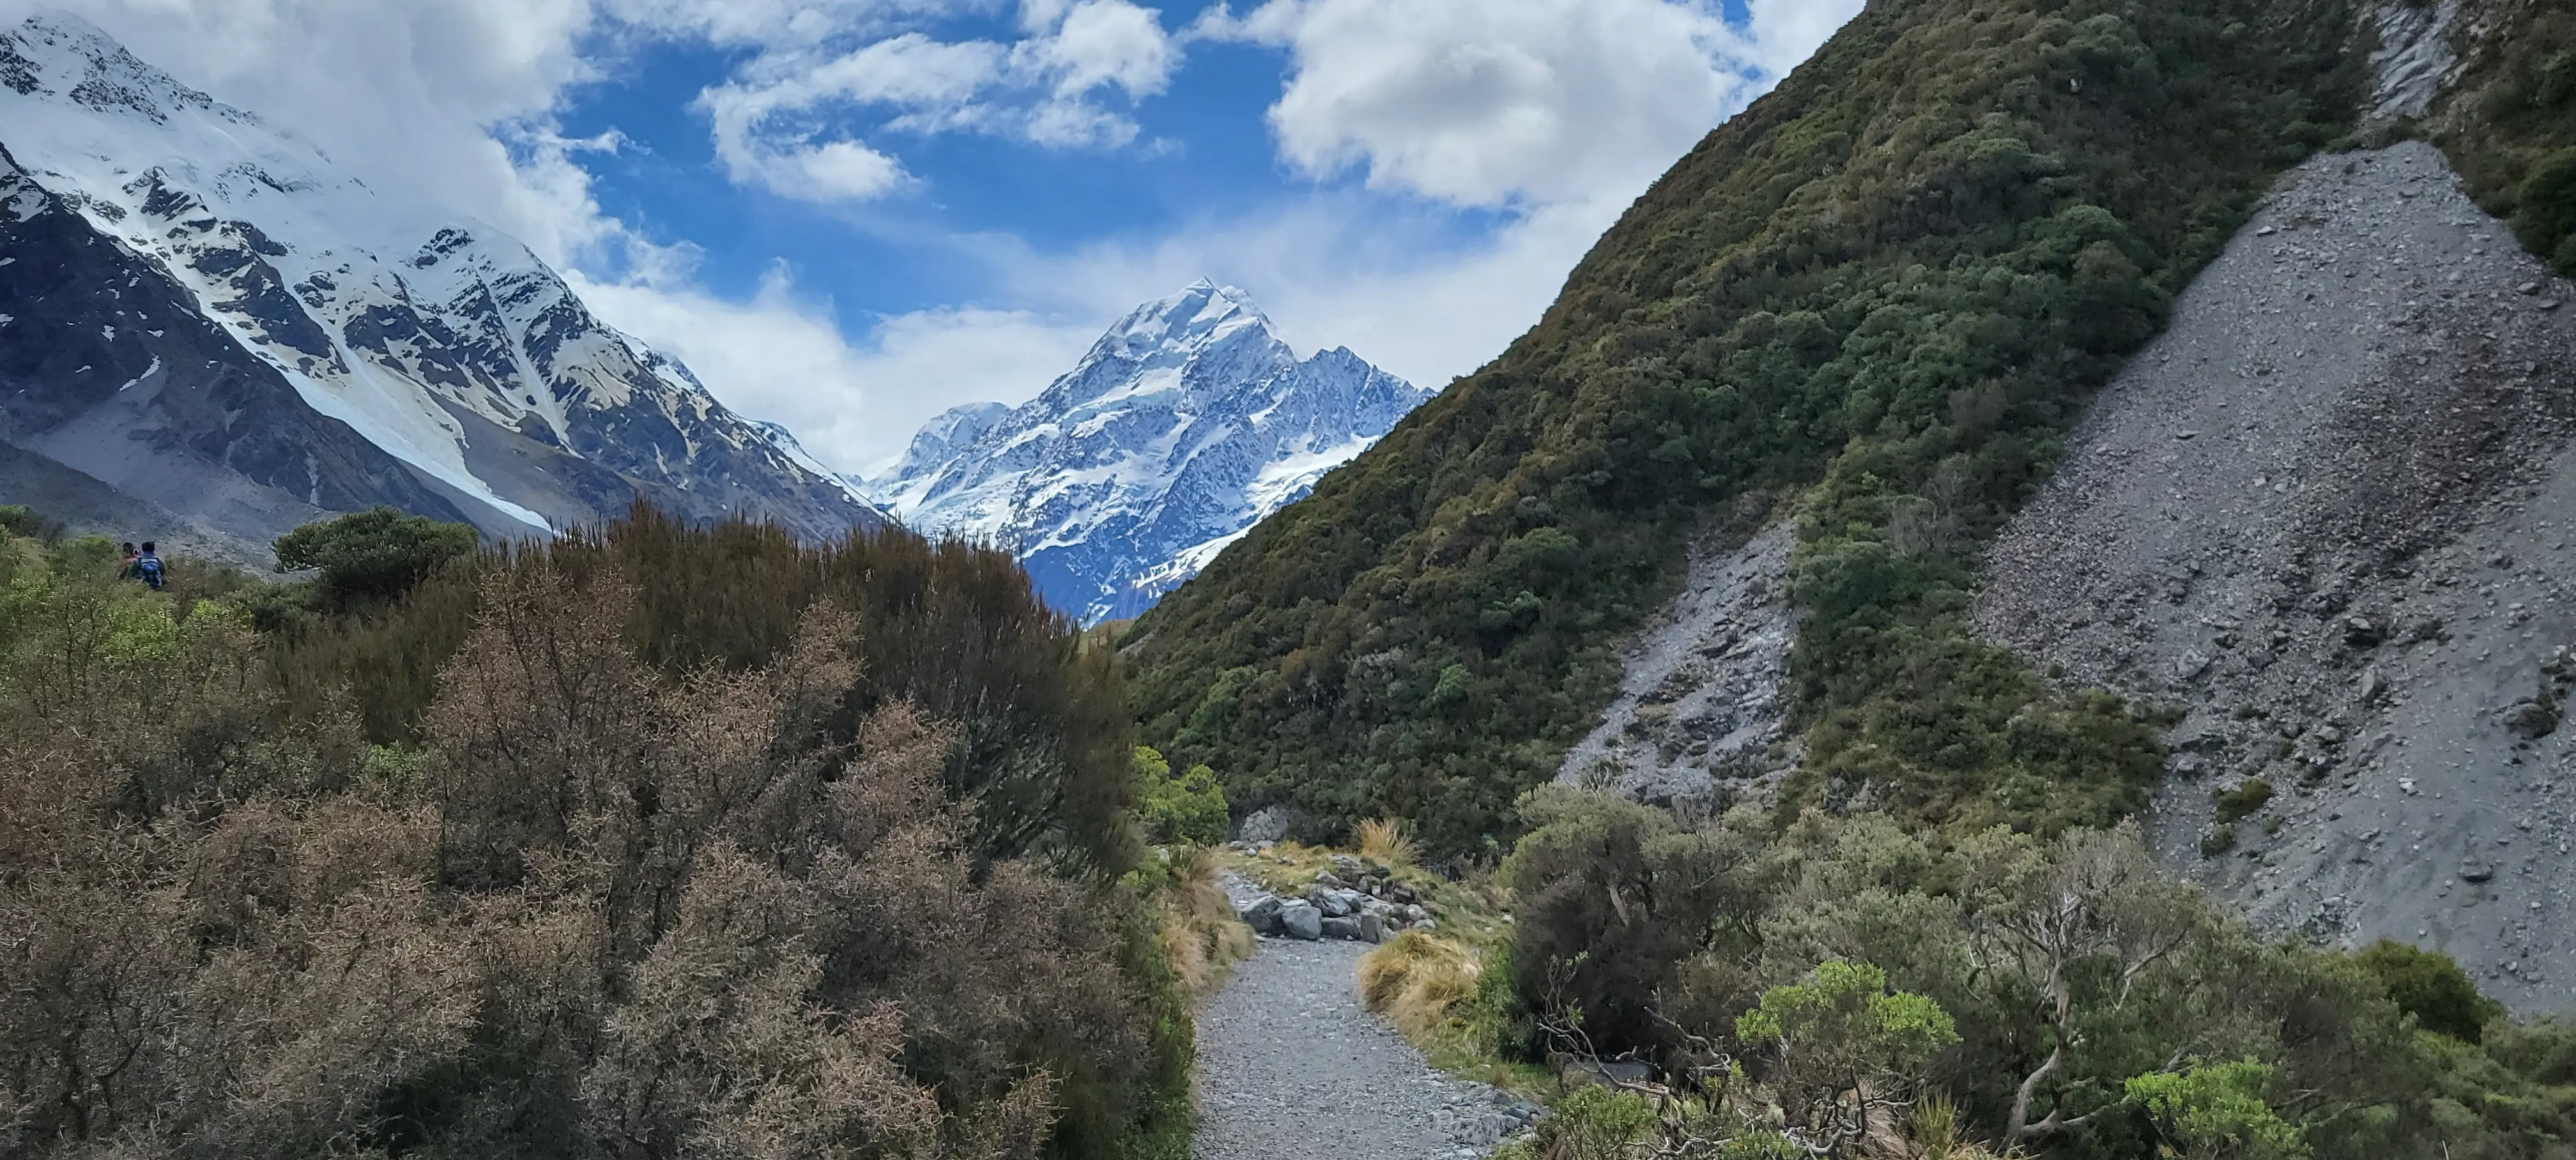 aoraki mount cook and hooker valley track